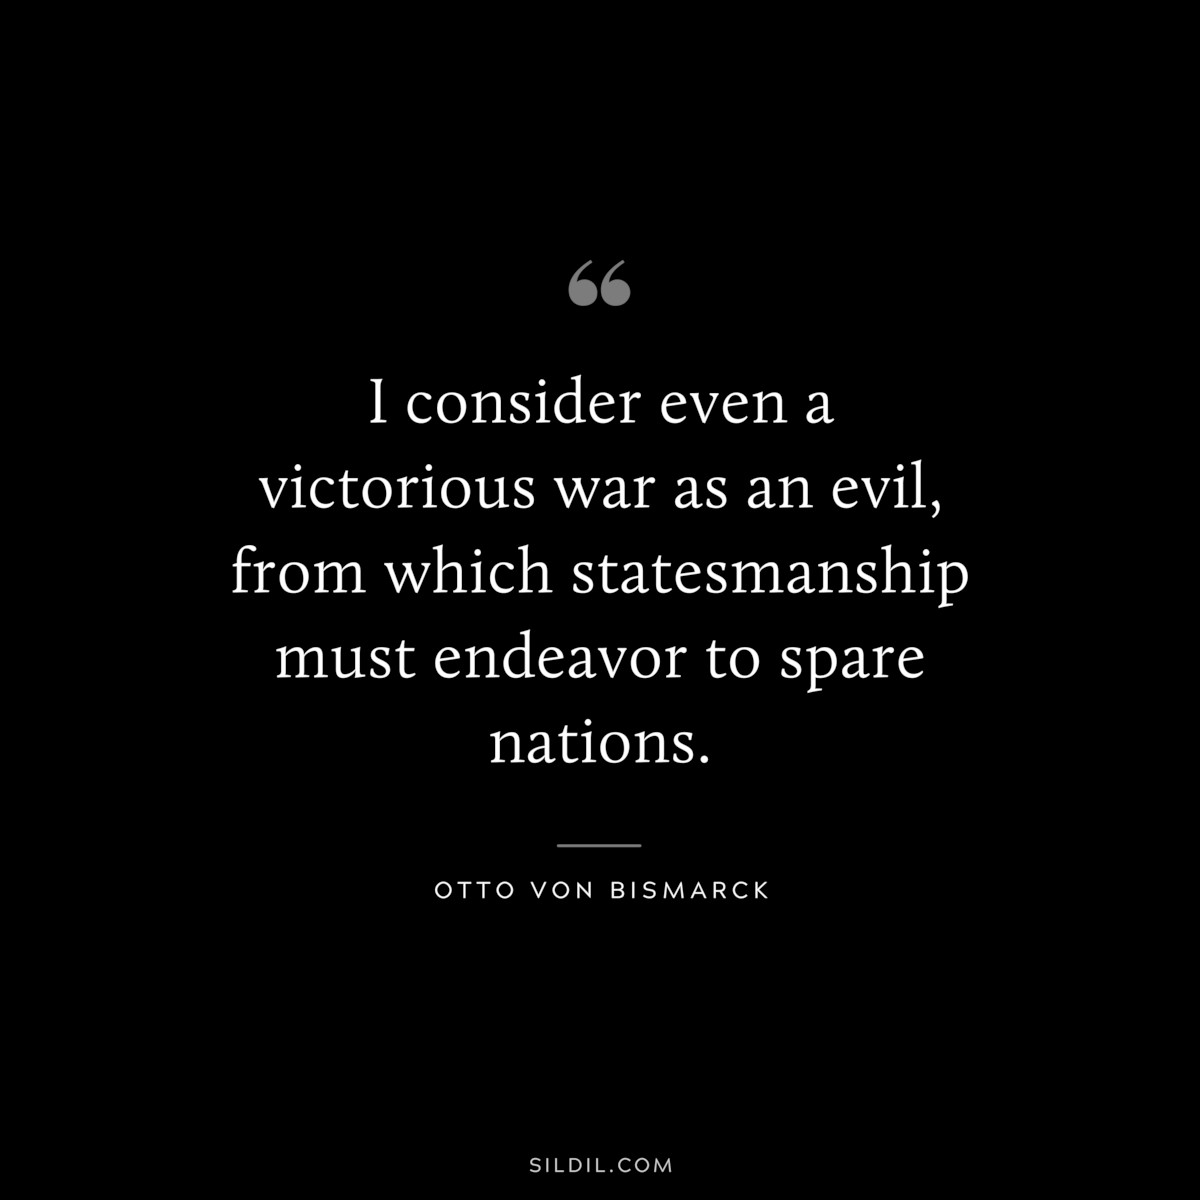 I consider even a victorious war as an evil, from which statesmanship must endeavor to spare nations. ― Otto von Bismarck